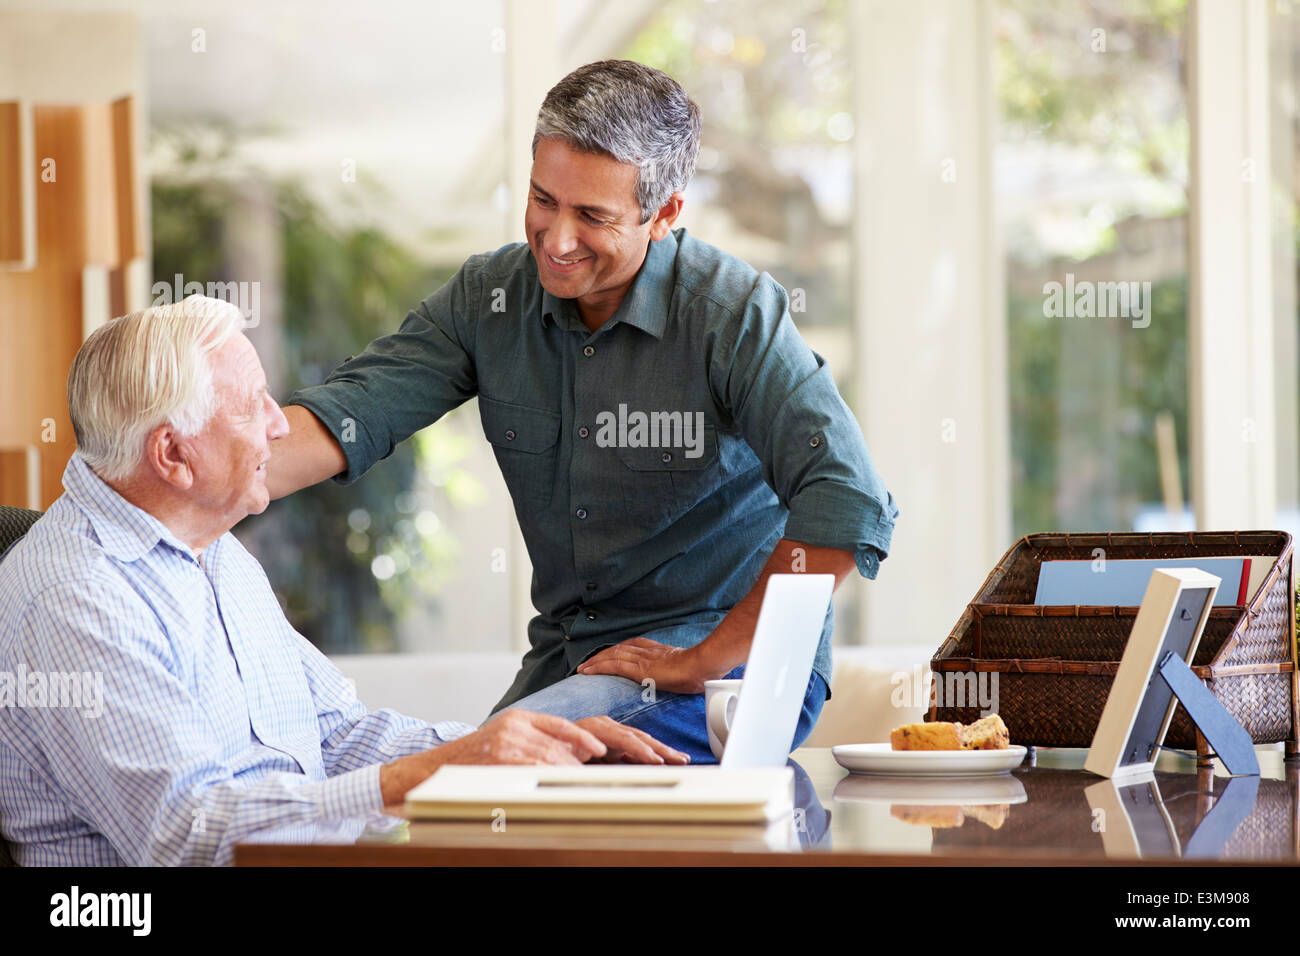 Adult Son Helping Father With Laptop Stock Photo